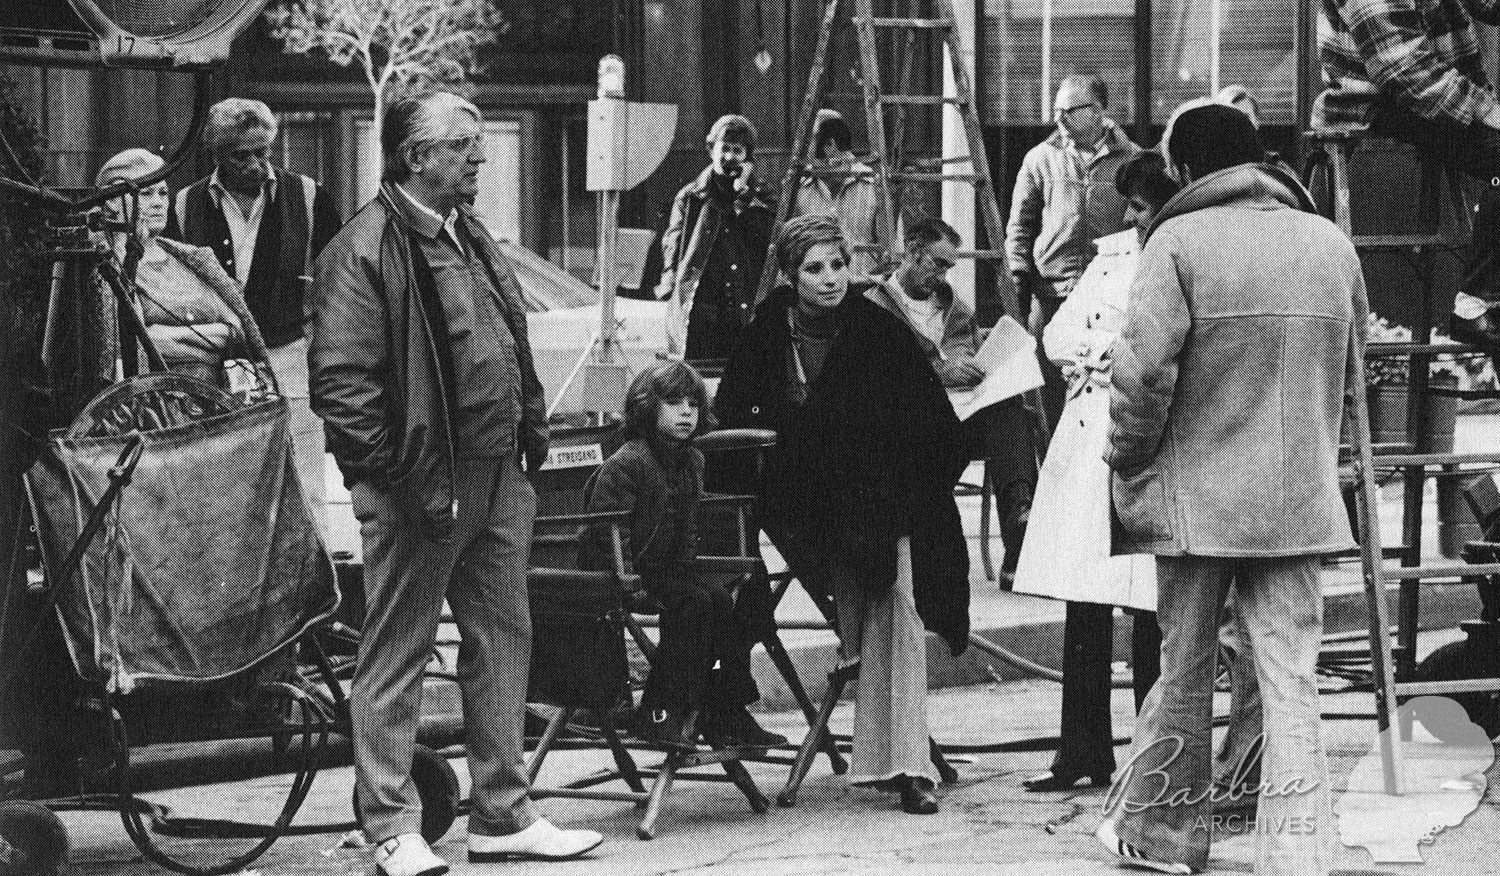 Streisand on the Columbia backlot with her son, Jason Gould.